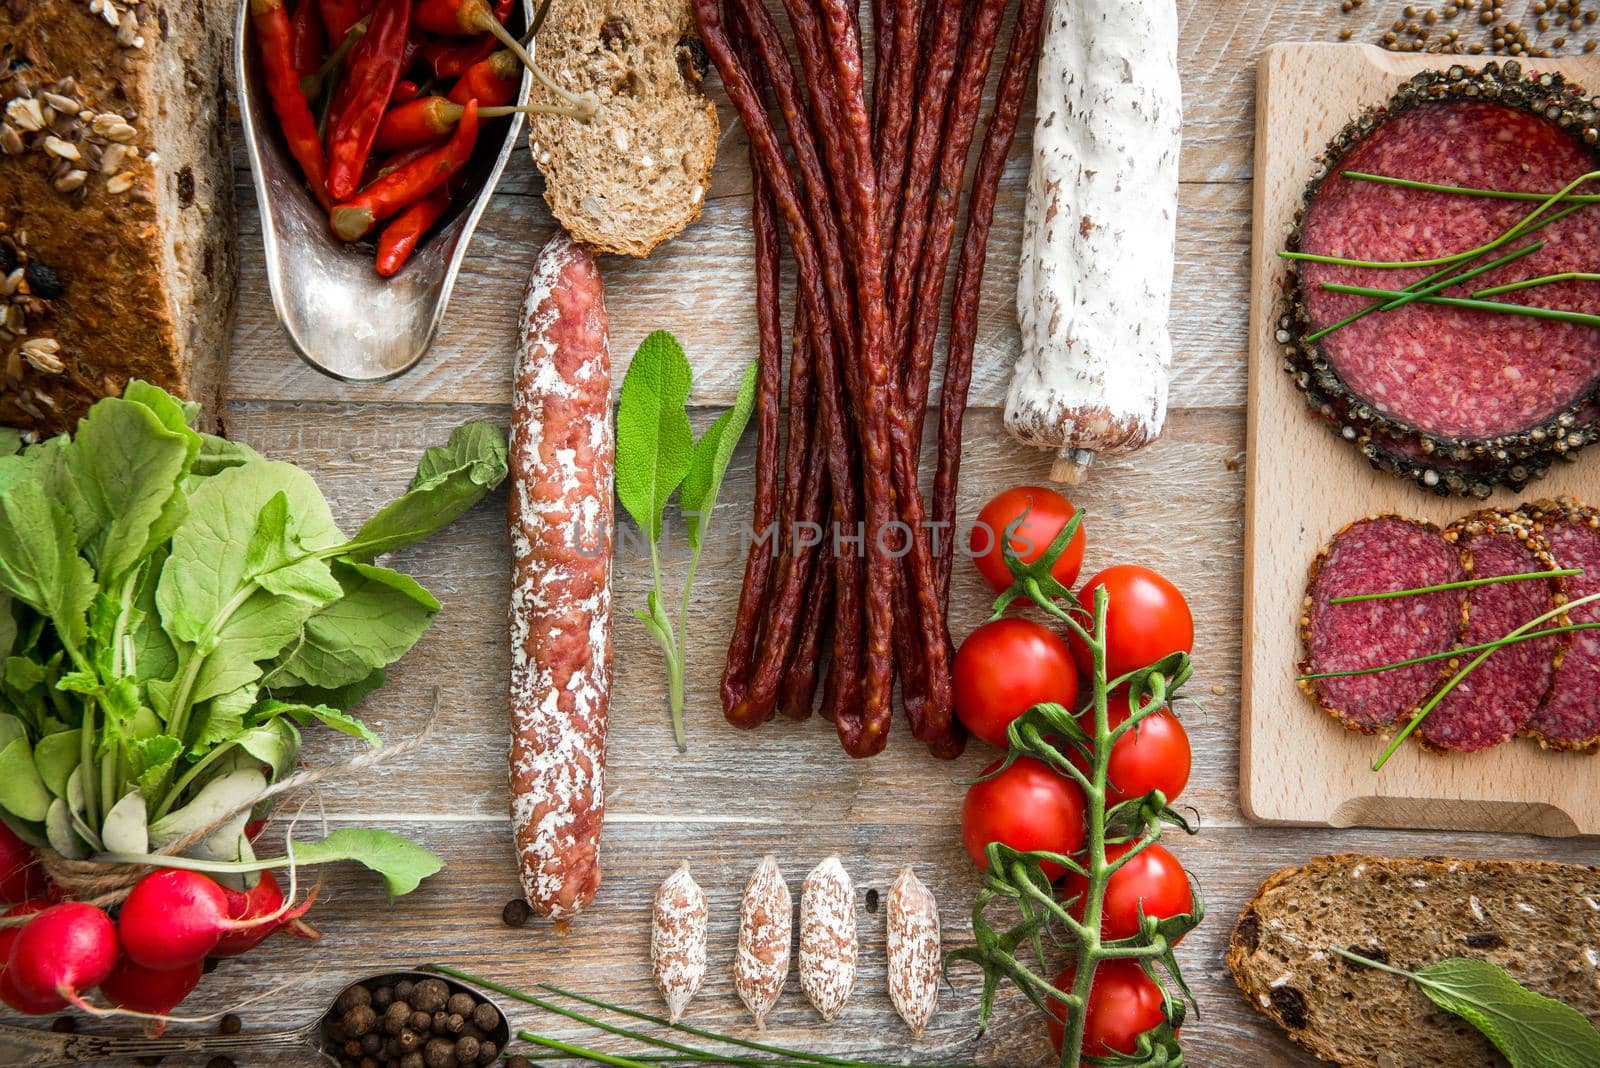 dried salami and vegetables on a wooden rustic table